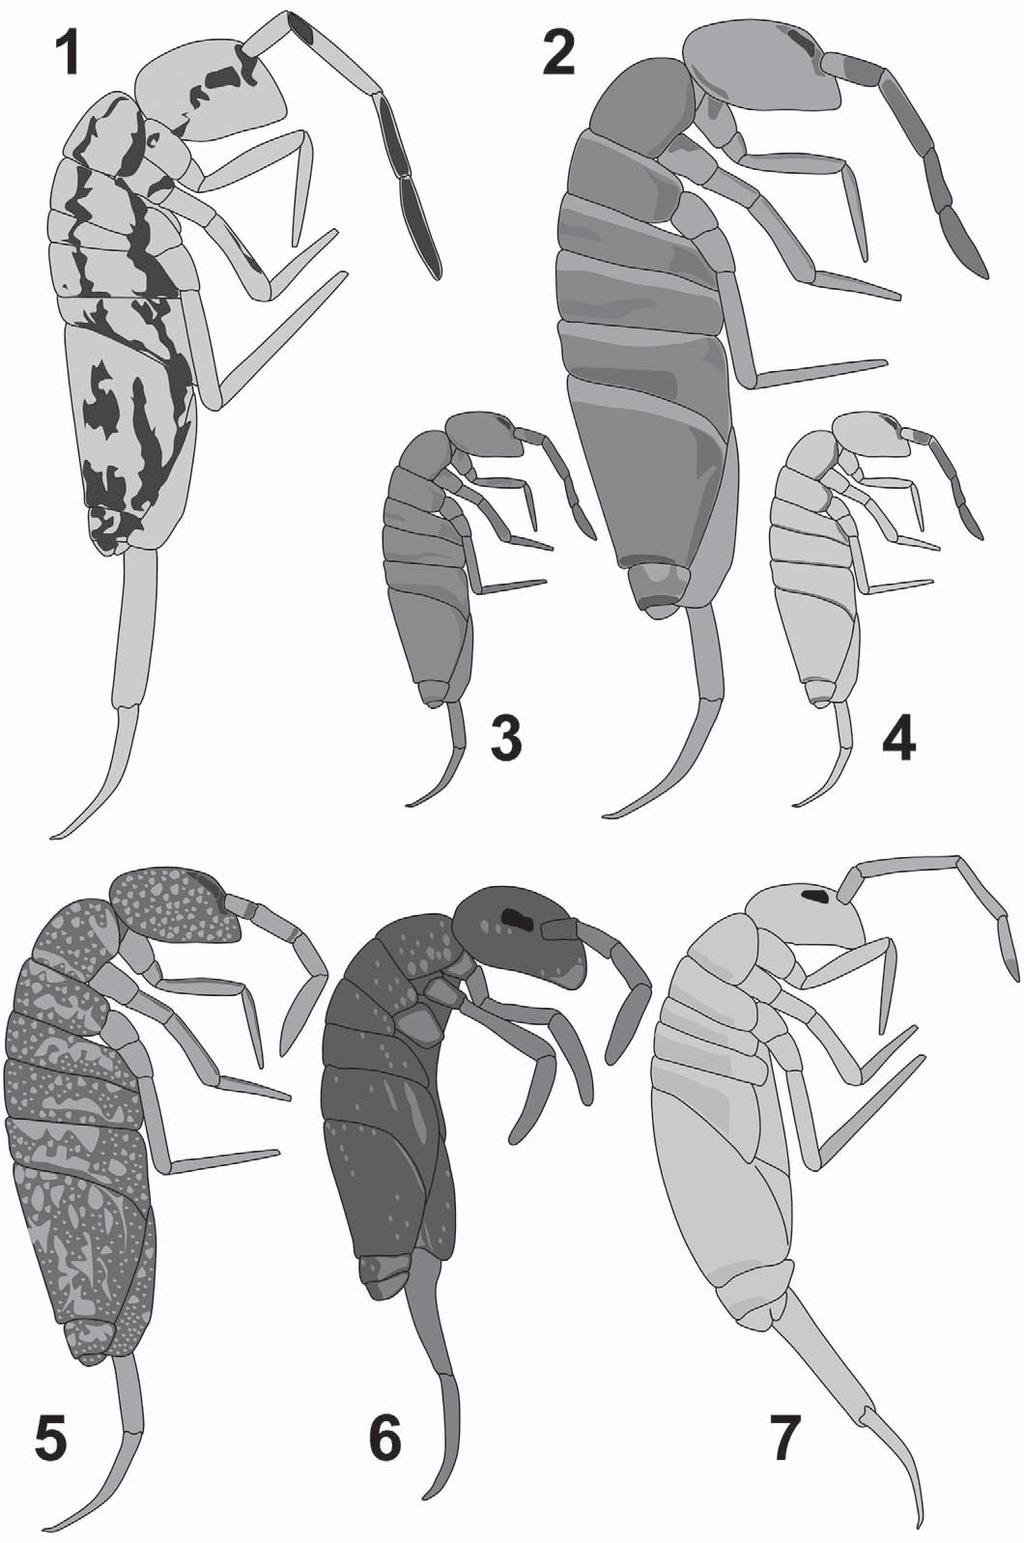 1556 Florida Entomologist 97(4) December 2014 Figs. 1-7. Color patterns of the species considered in this paper.